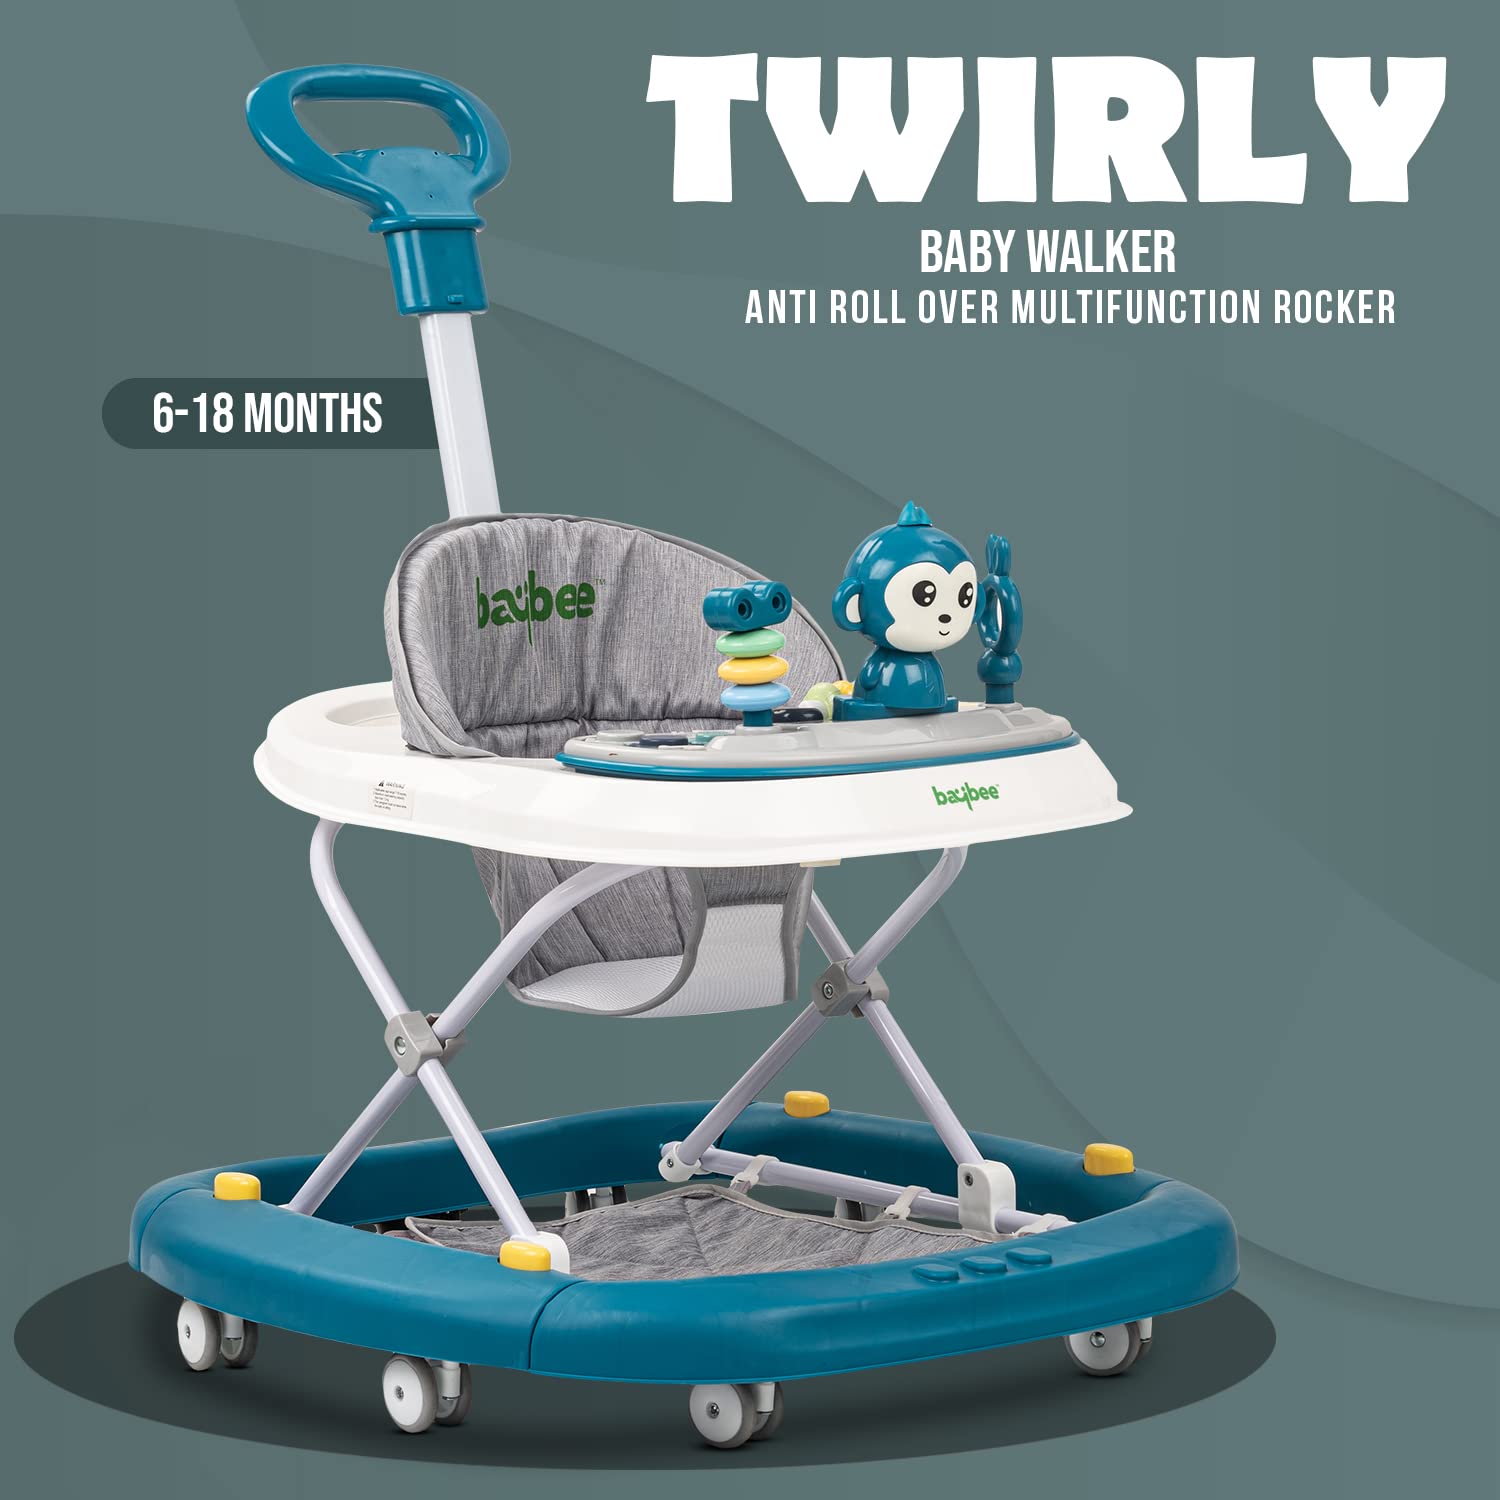 Baybee Baby Walker for Kids, Round Kids Walker with Rocker, Parental Handle, 4 Seat Height Adjustable | Activity Walker for Baby with Musical Toy Bar | Walker Baby 6-18 Months Boy Girl (Orion Blue)